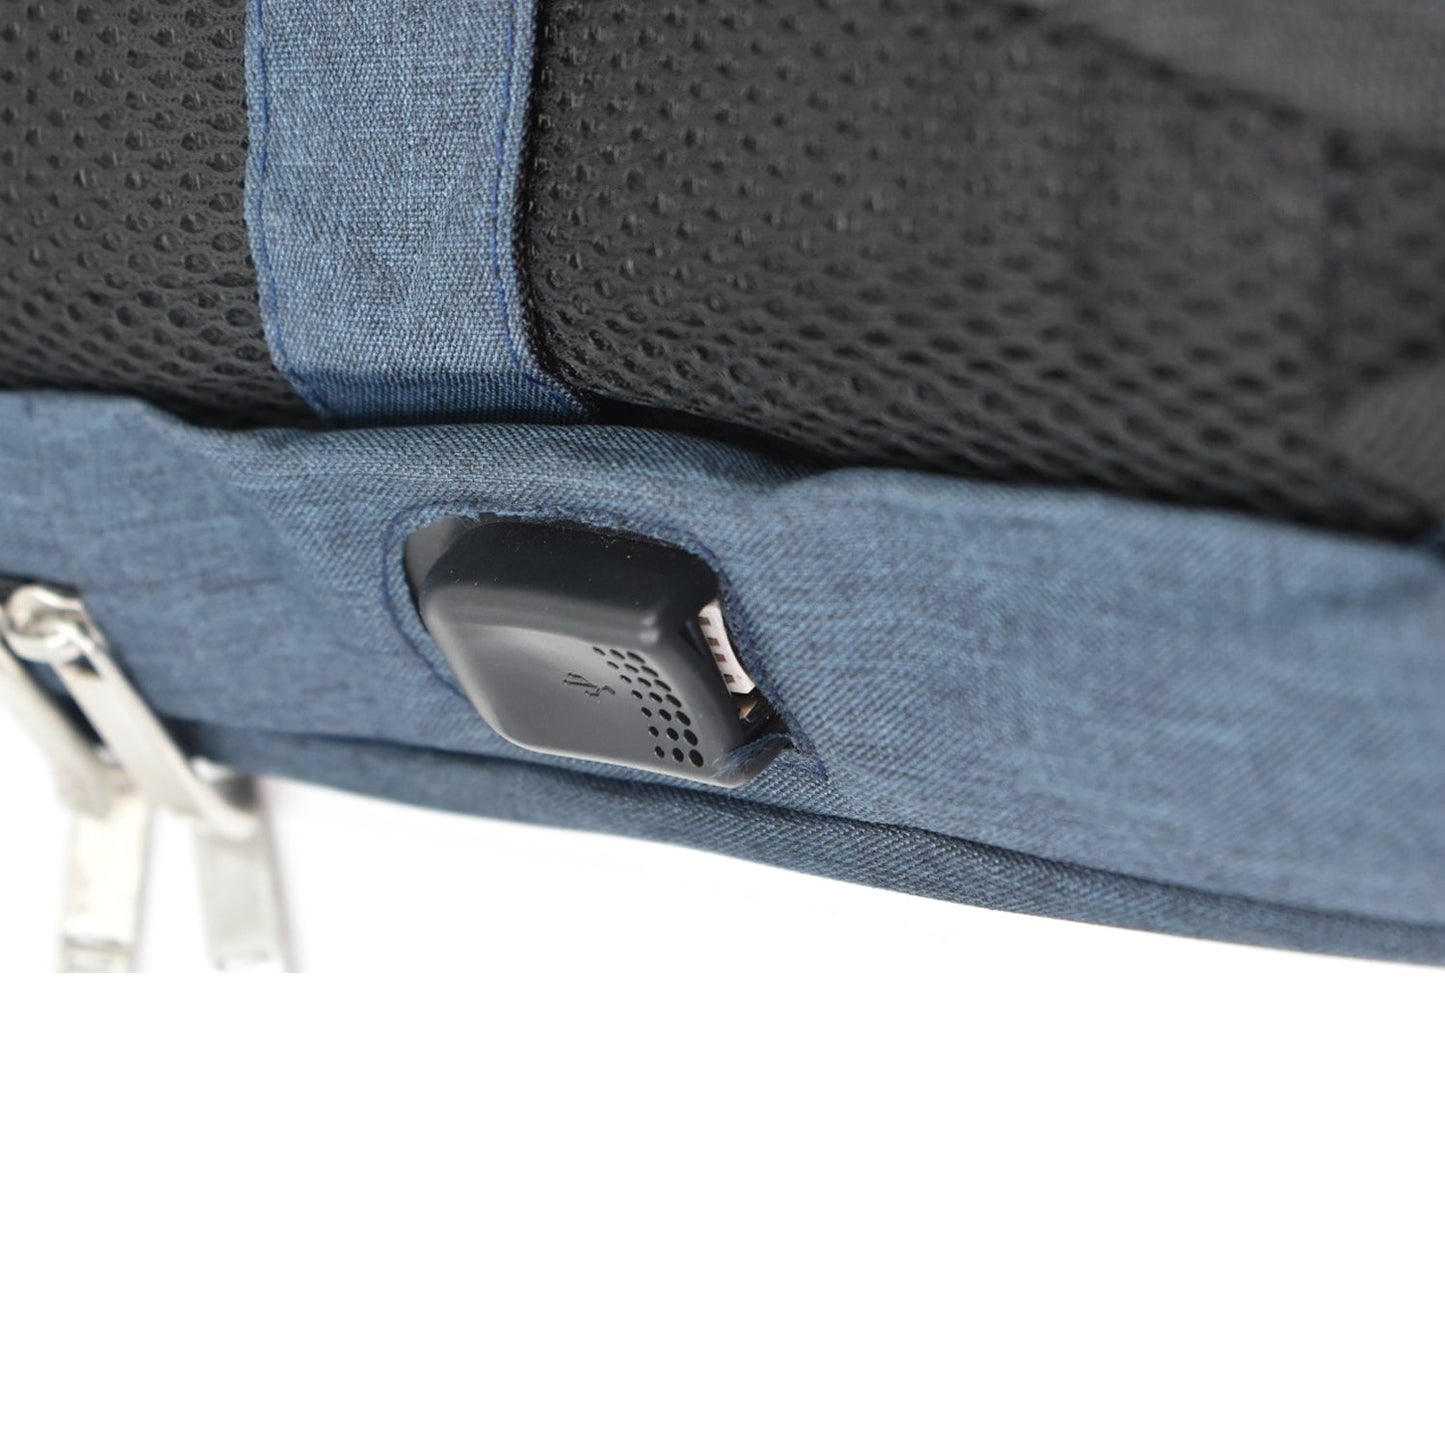 6138 USB Point Laptop Bag used widely in all kinds of official purposes as a laptop holder and cover and make's the laptop safe and secure. 